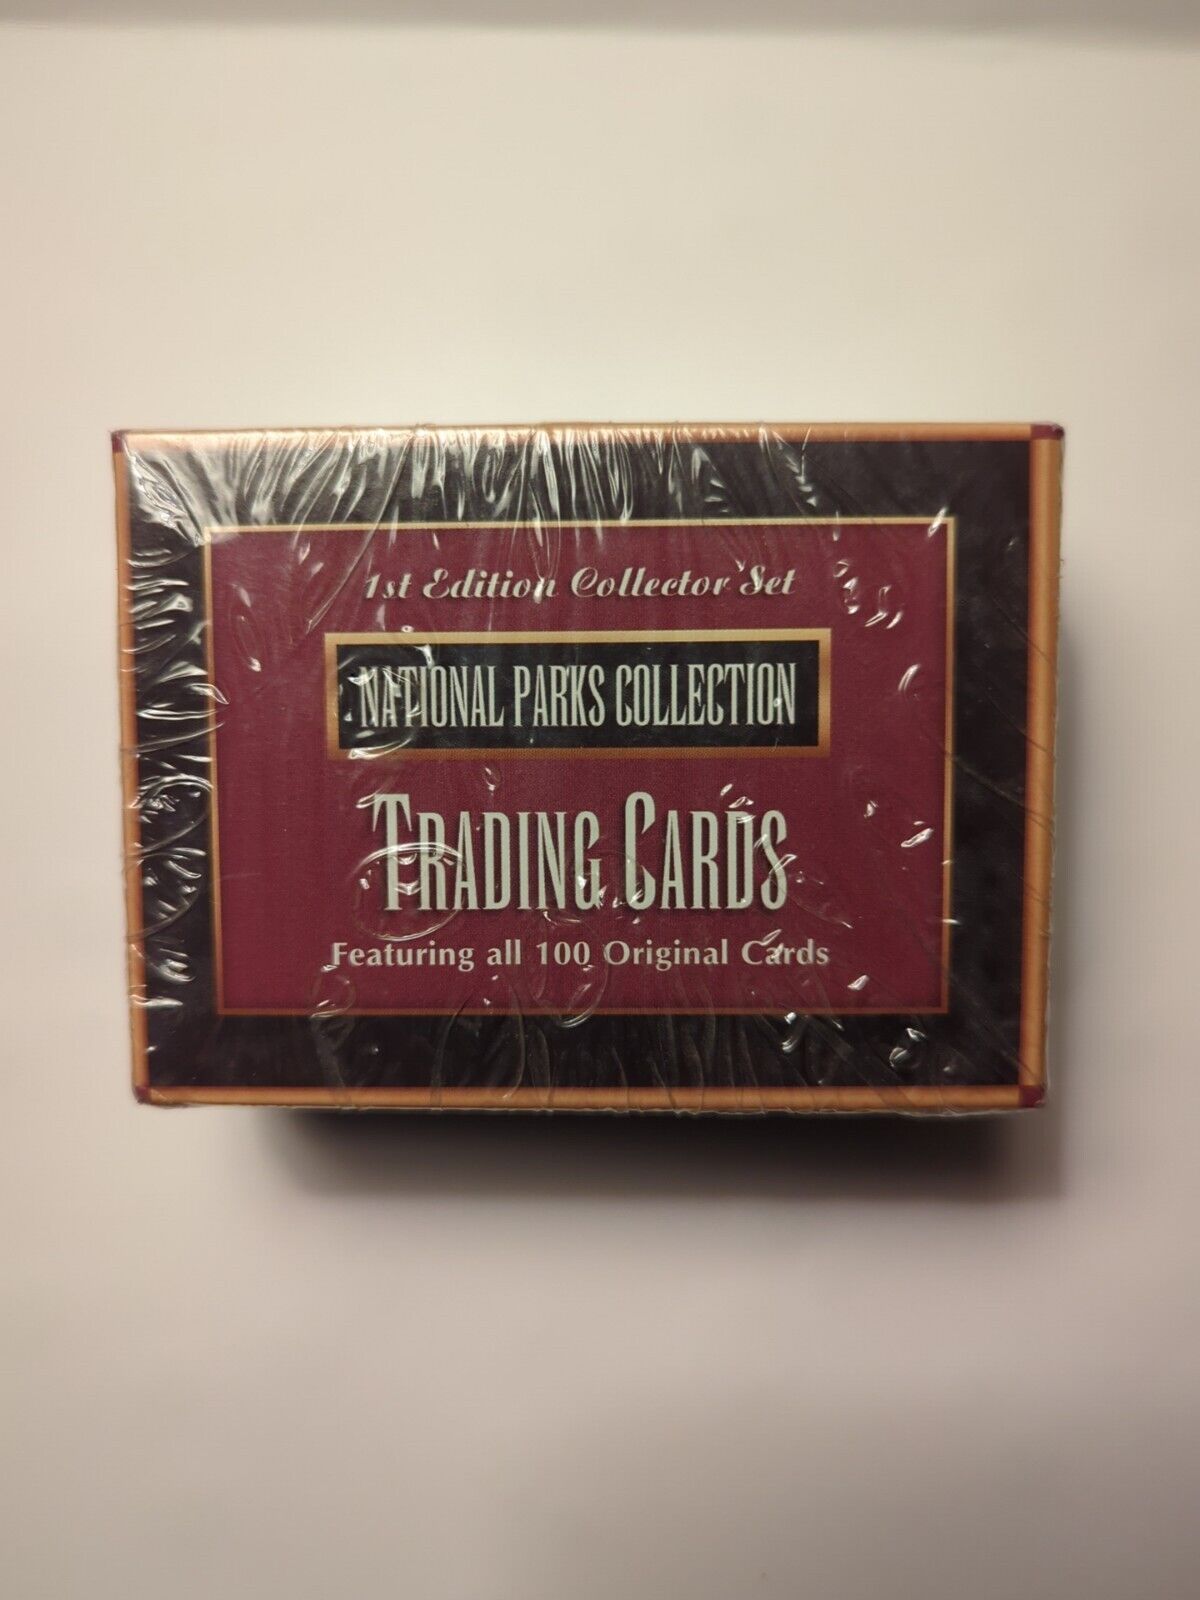 U.S. National Parks Collection Trading Cards Box 1st Edition Collector Set 1-100